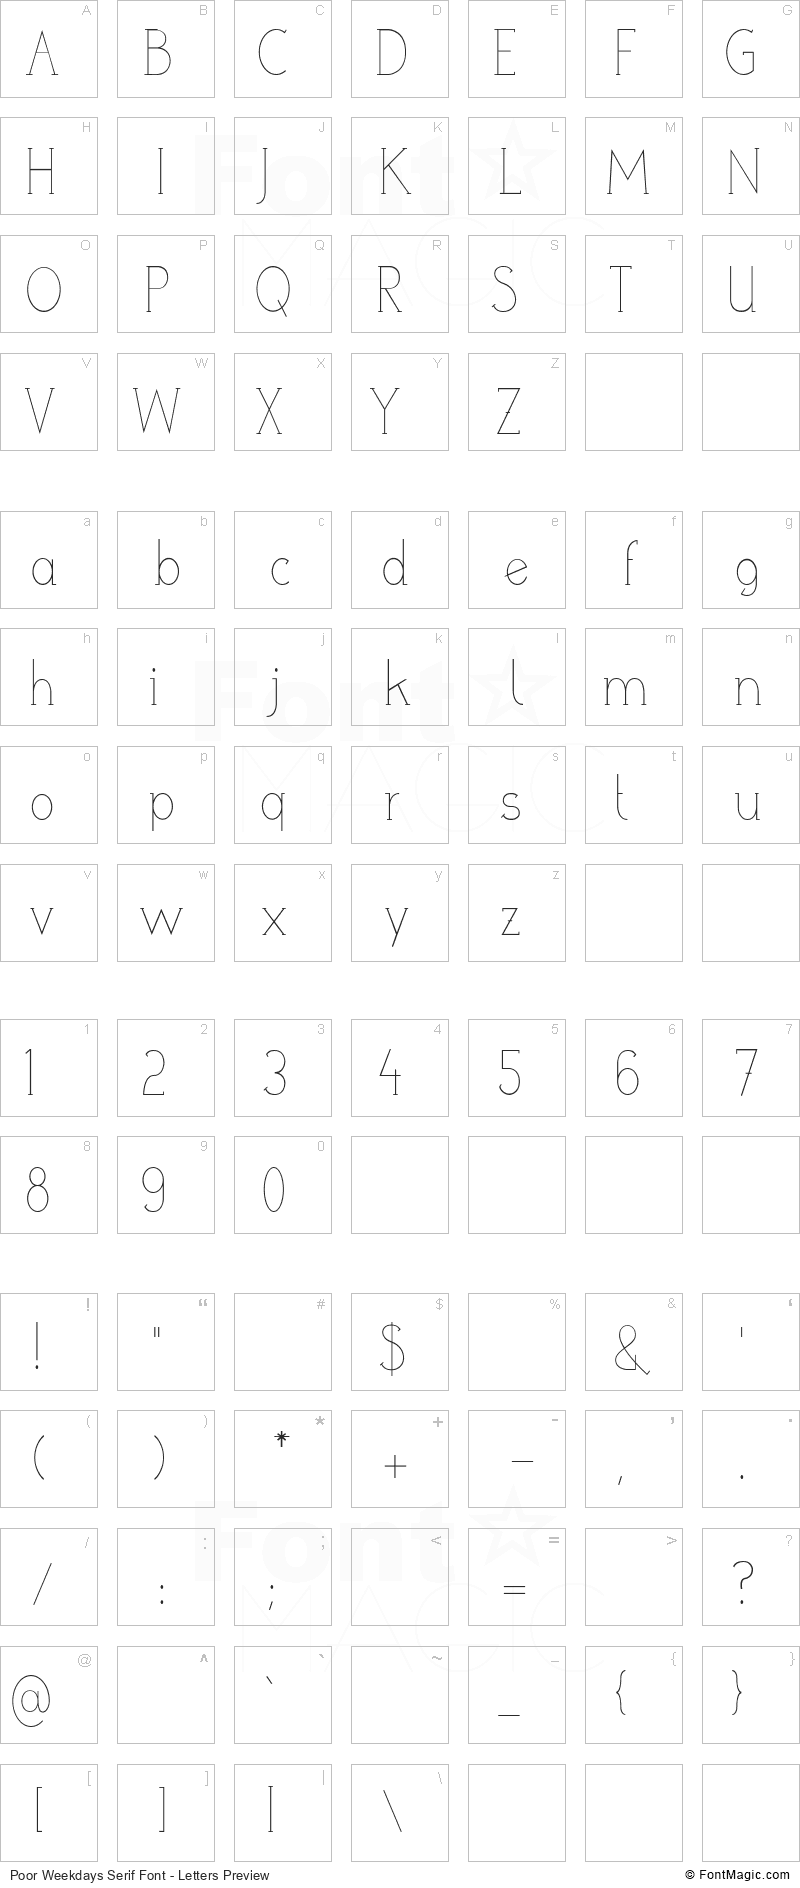 Poor Weekdays Serif Font - All Latters Preview Chart